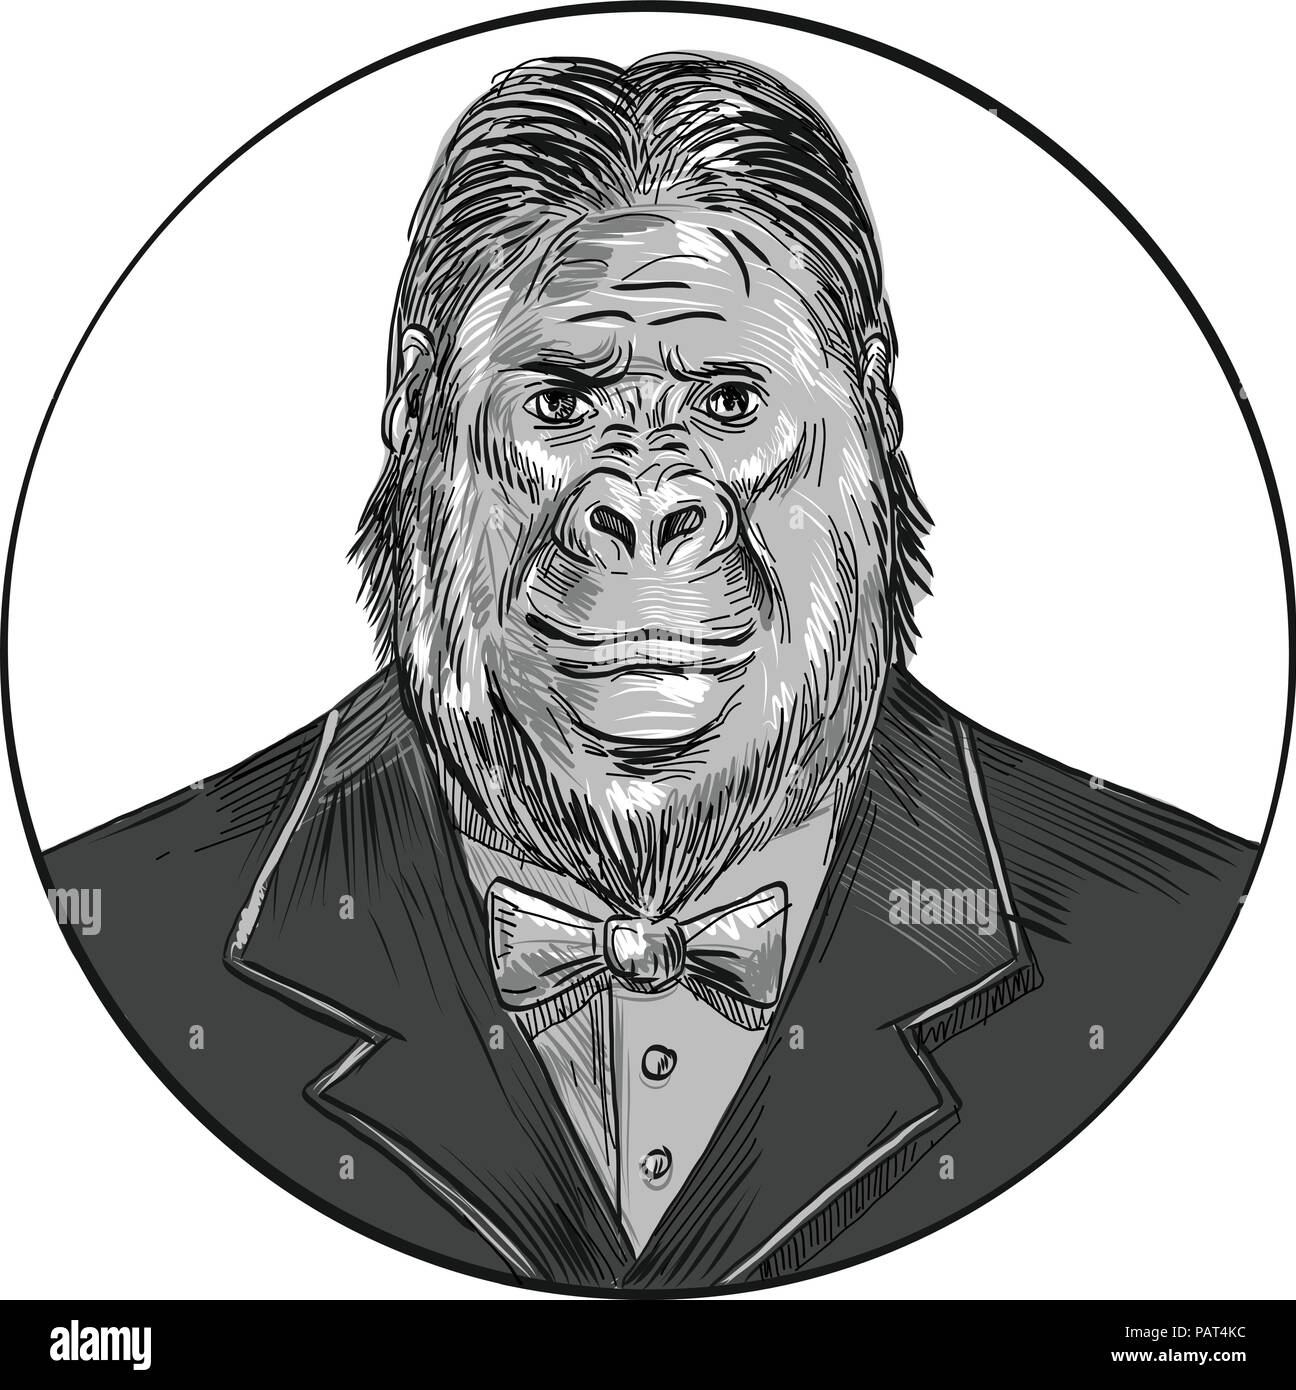 Drawing sketch style illustration of an elegant, hipster and well-groomed gorilla, ape or primate wearing a tuxedo or business suit and bow tie. Stock Vector